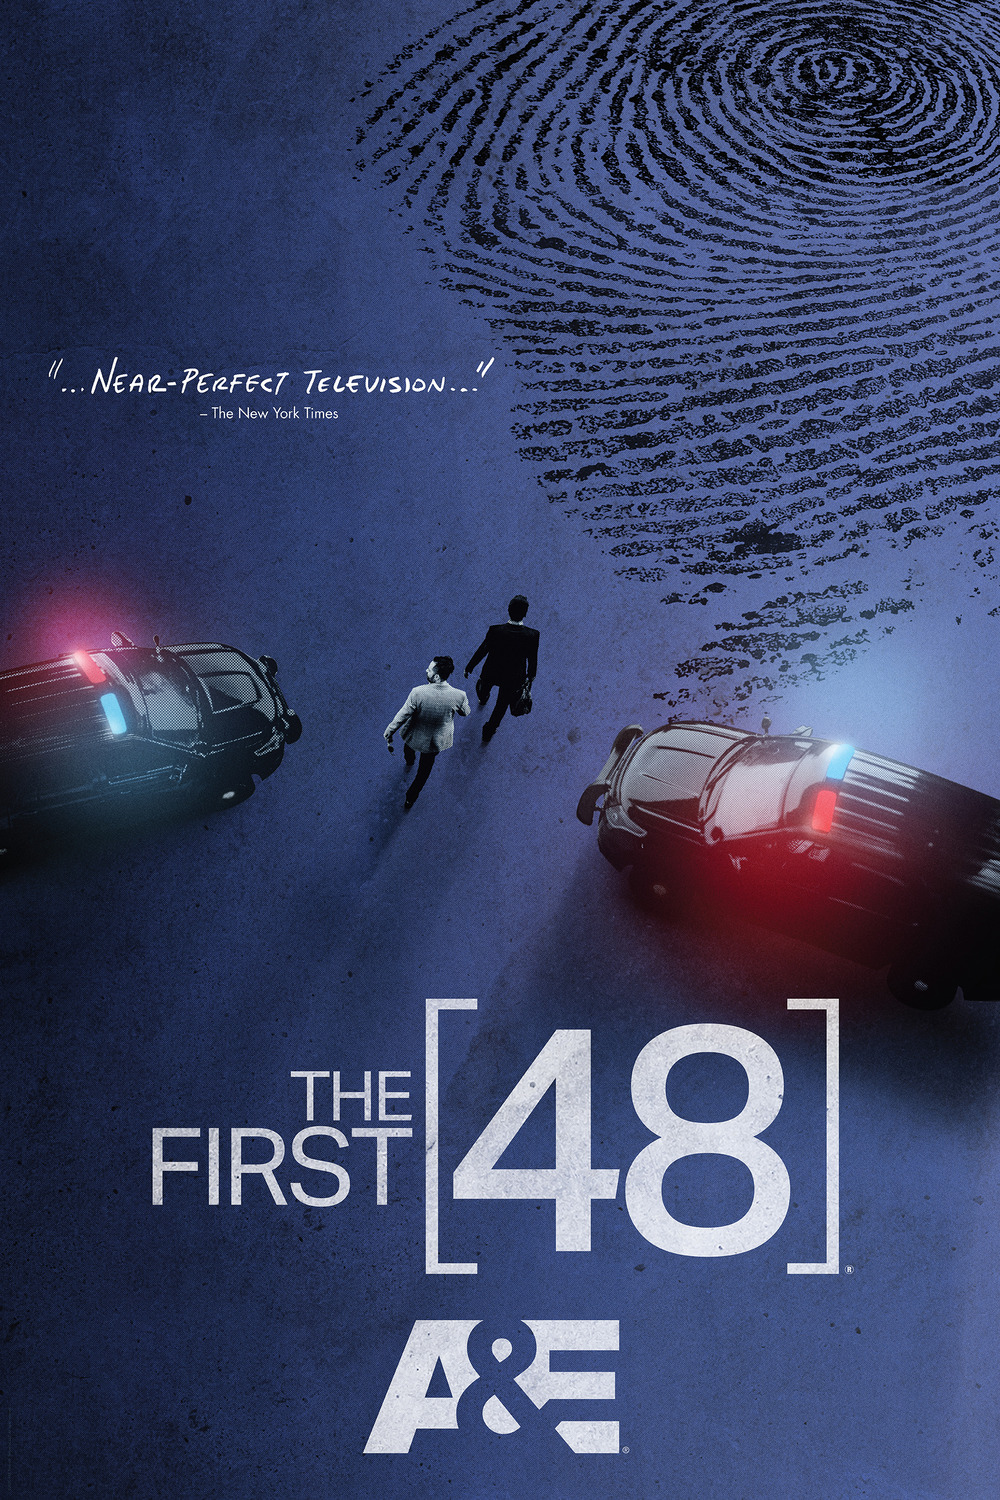 Extra Large TV Poster Image for The First 48 